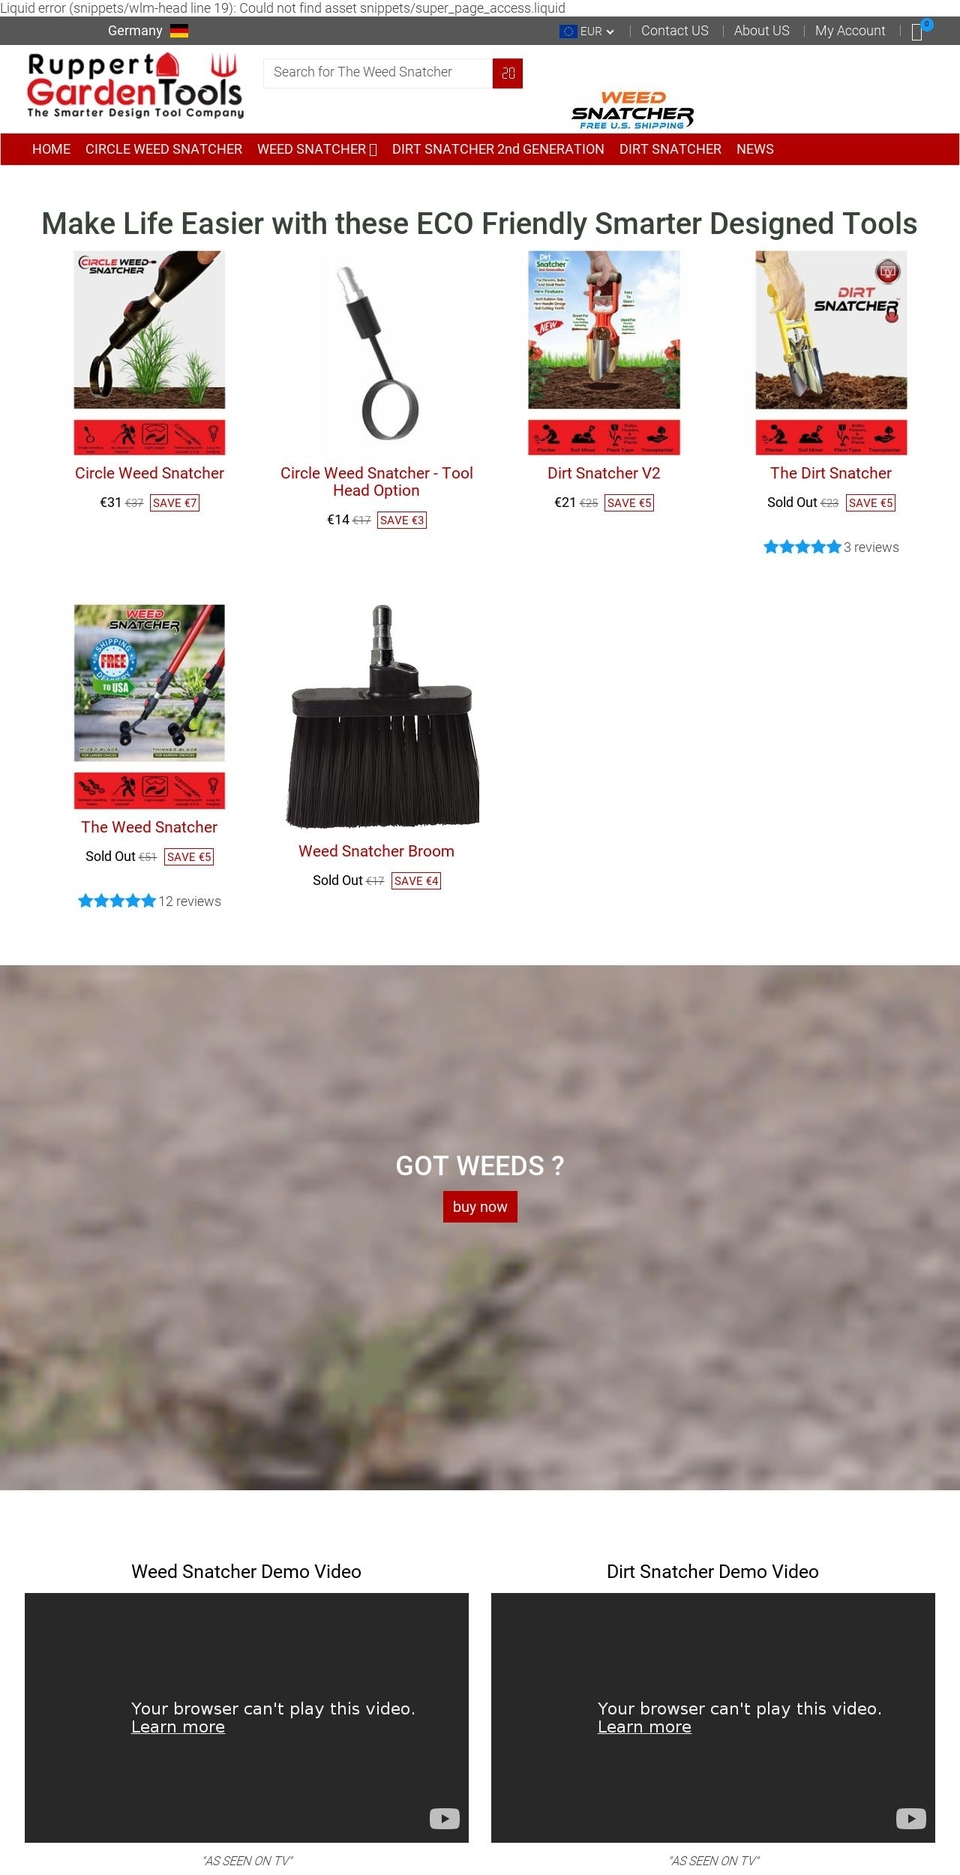 Ruppert Garden Tools Theme Shopify theme site example theweedsnatcher.info